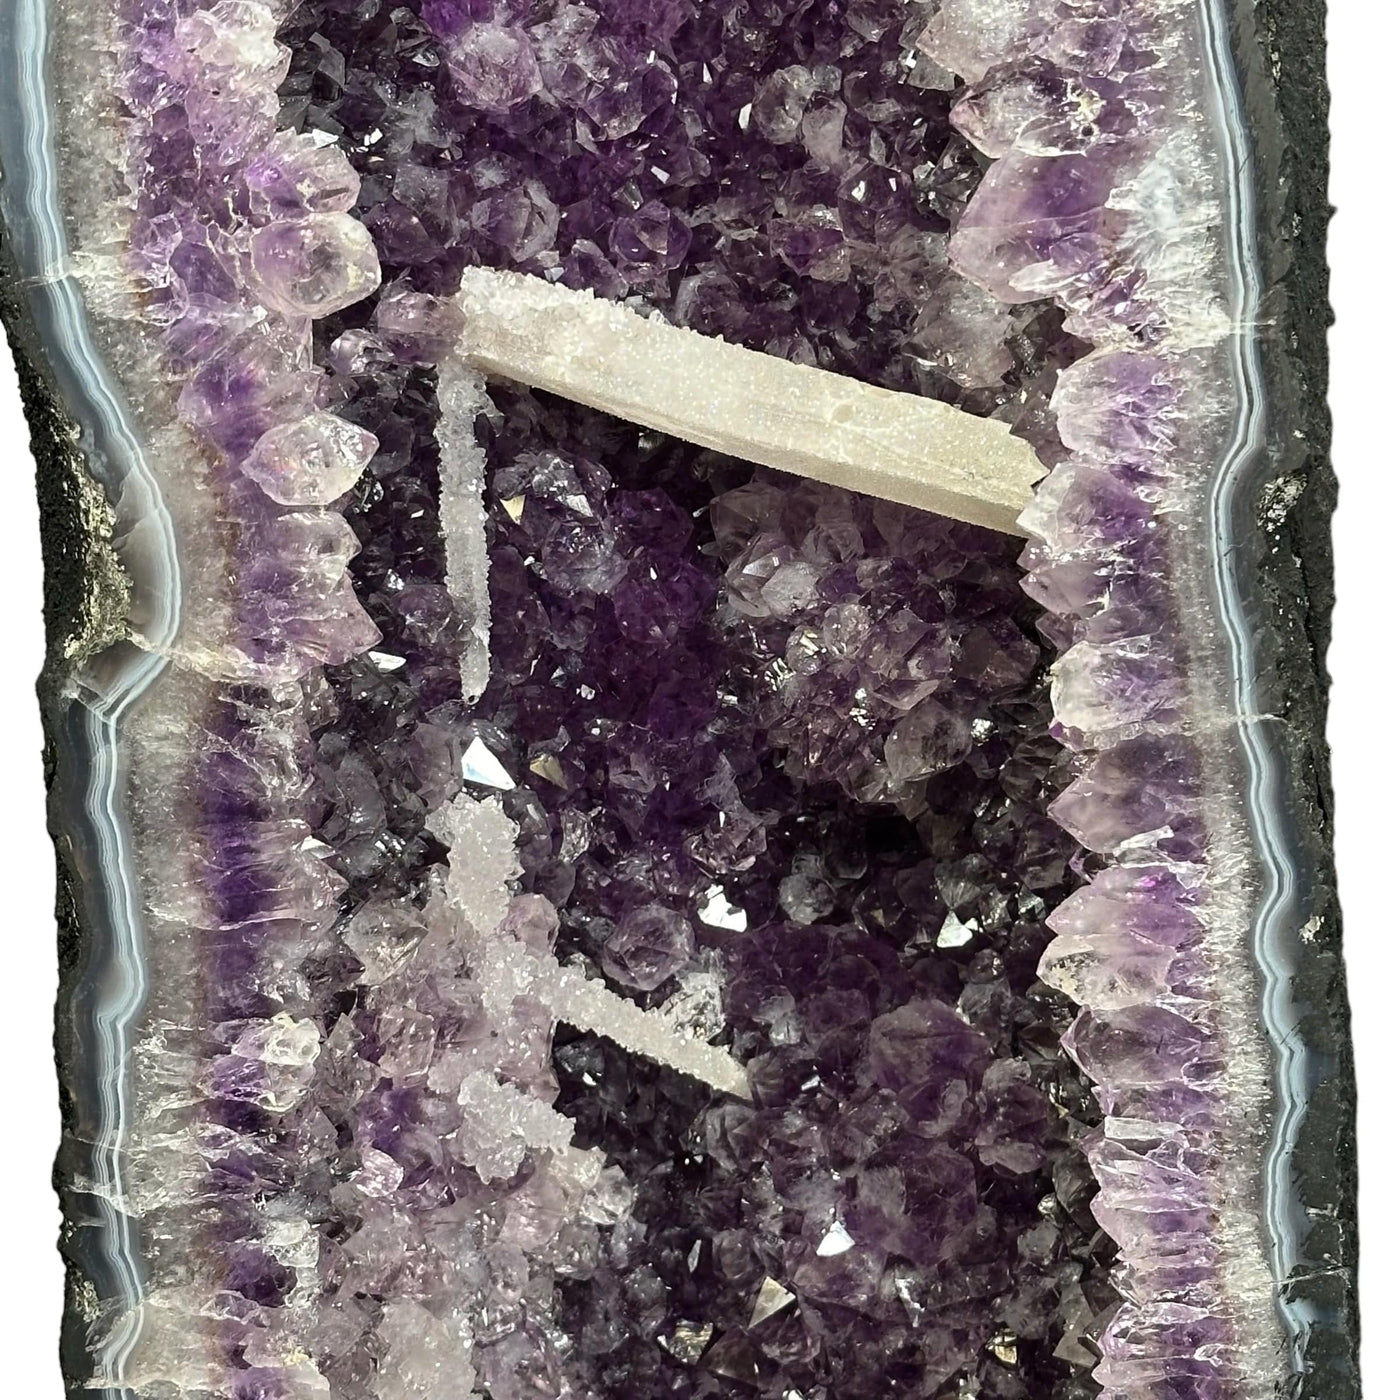 close up of the calcite druzy formations growing off the amethyst